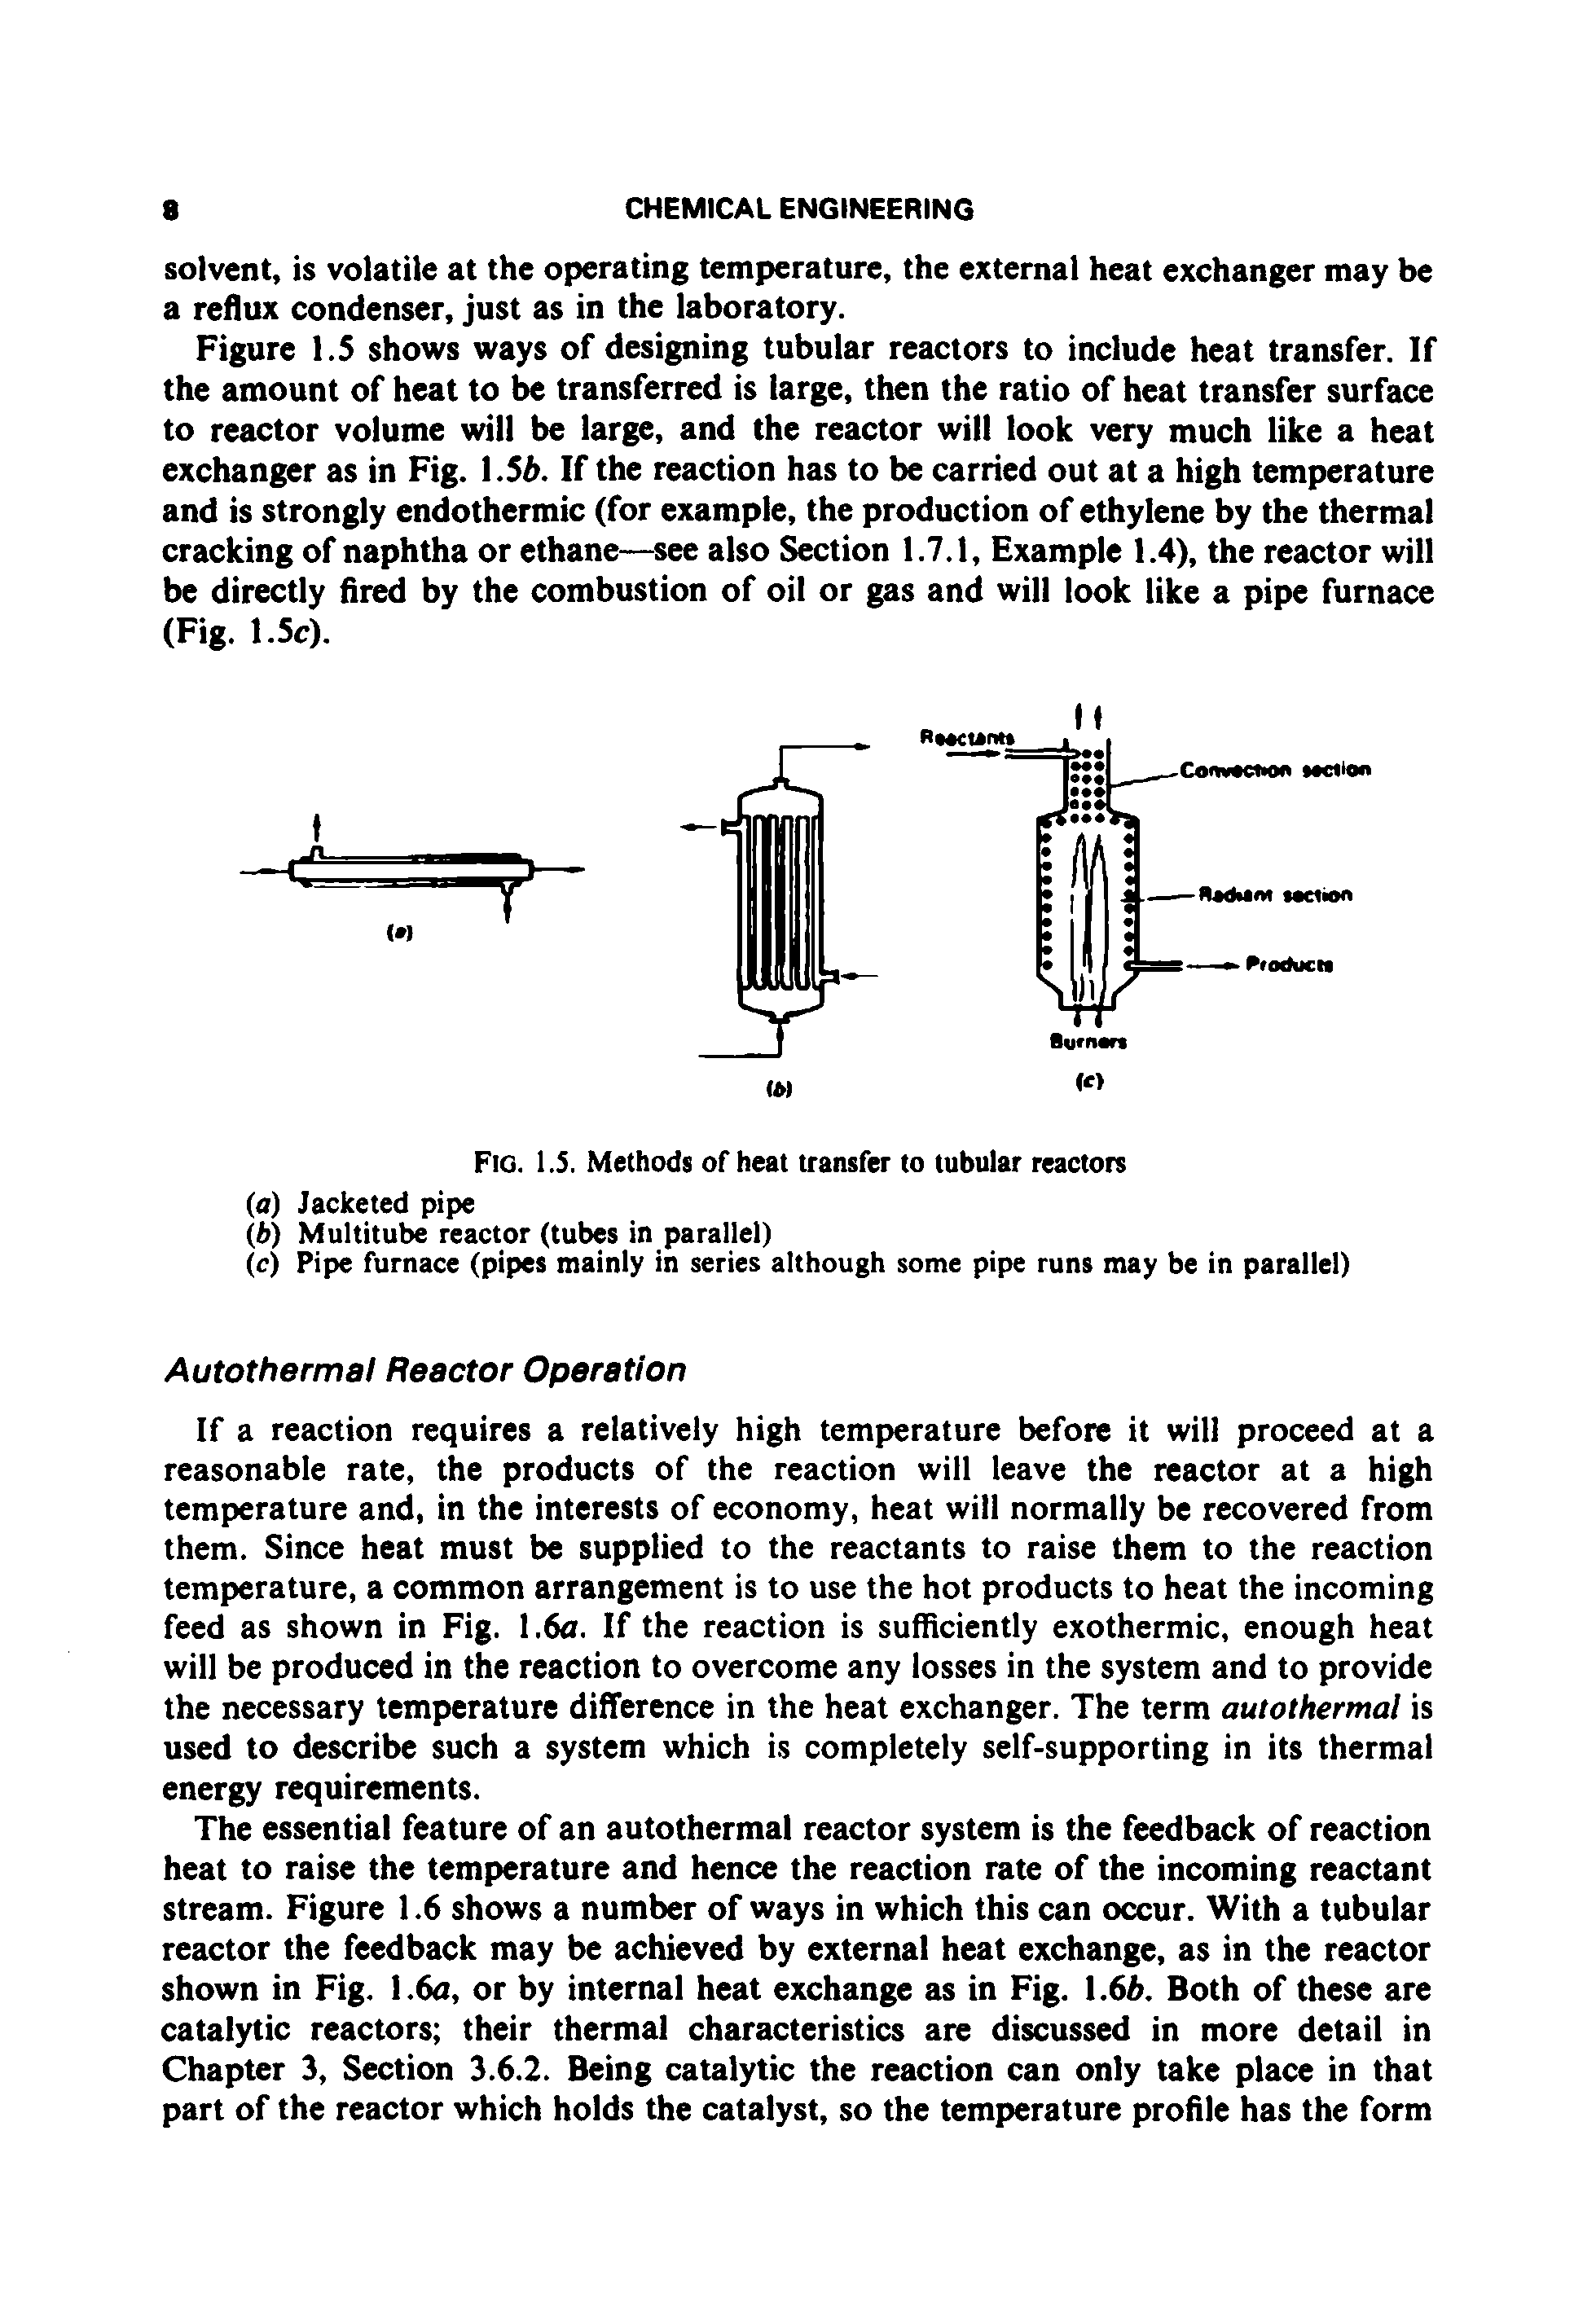 Figure 1.5 shows ways of designing tubular reactors to include heat transfer. If the amount of heat to be transferred is large, then the ratio of heat transfer surface to reactor volume will be large, and the reactor will look very much like a heat exchanger as in Fig. 1.5b. If the reaction has to be carried out at a high temperature and is strongly endothermic (for example, the production of ethylene by the thermal cracking of naphtha or ethane—see also Section 1.7.1, Example 1.4), the reactor will be directly fired by the combustion of oil or gas and will look like a pipe furnace (Fig. 1.5c).